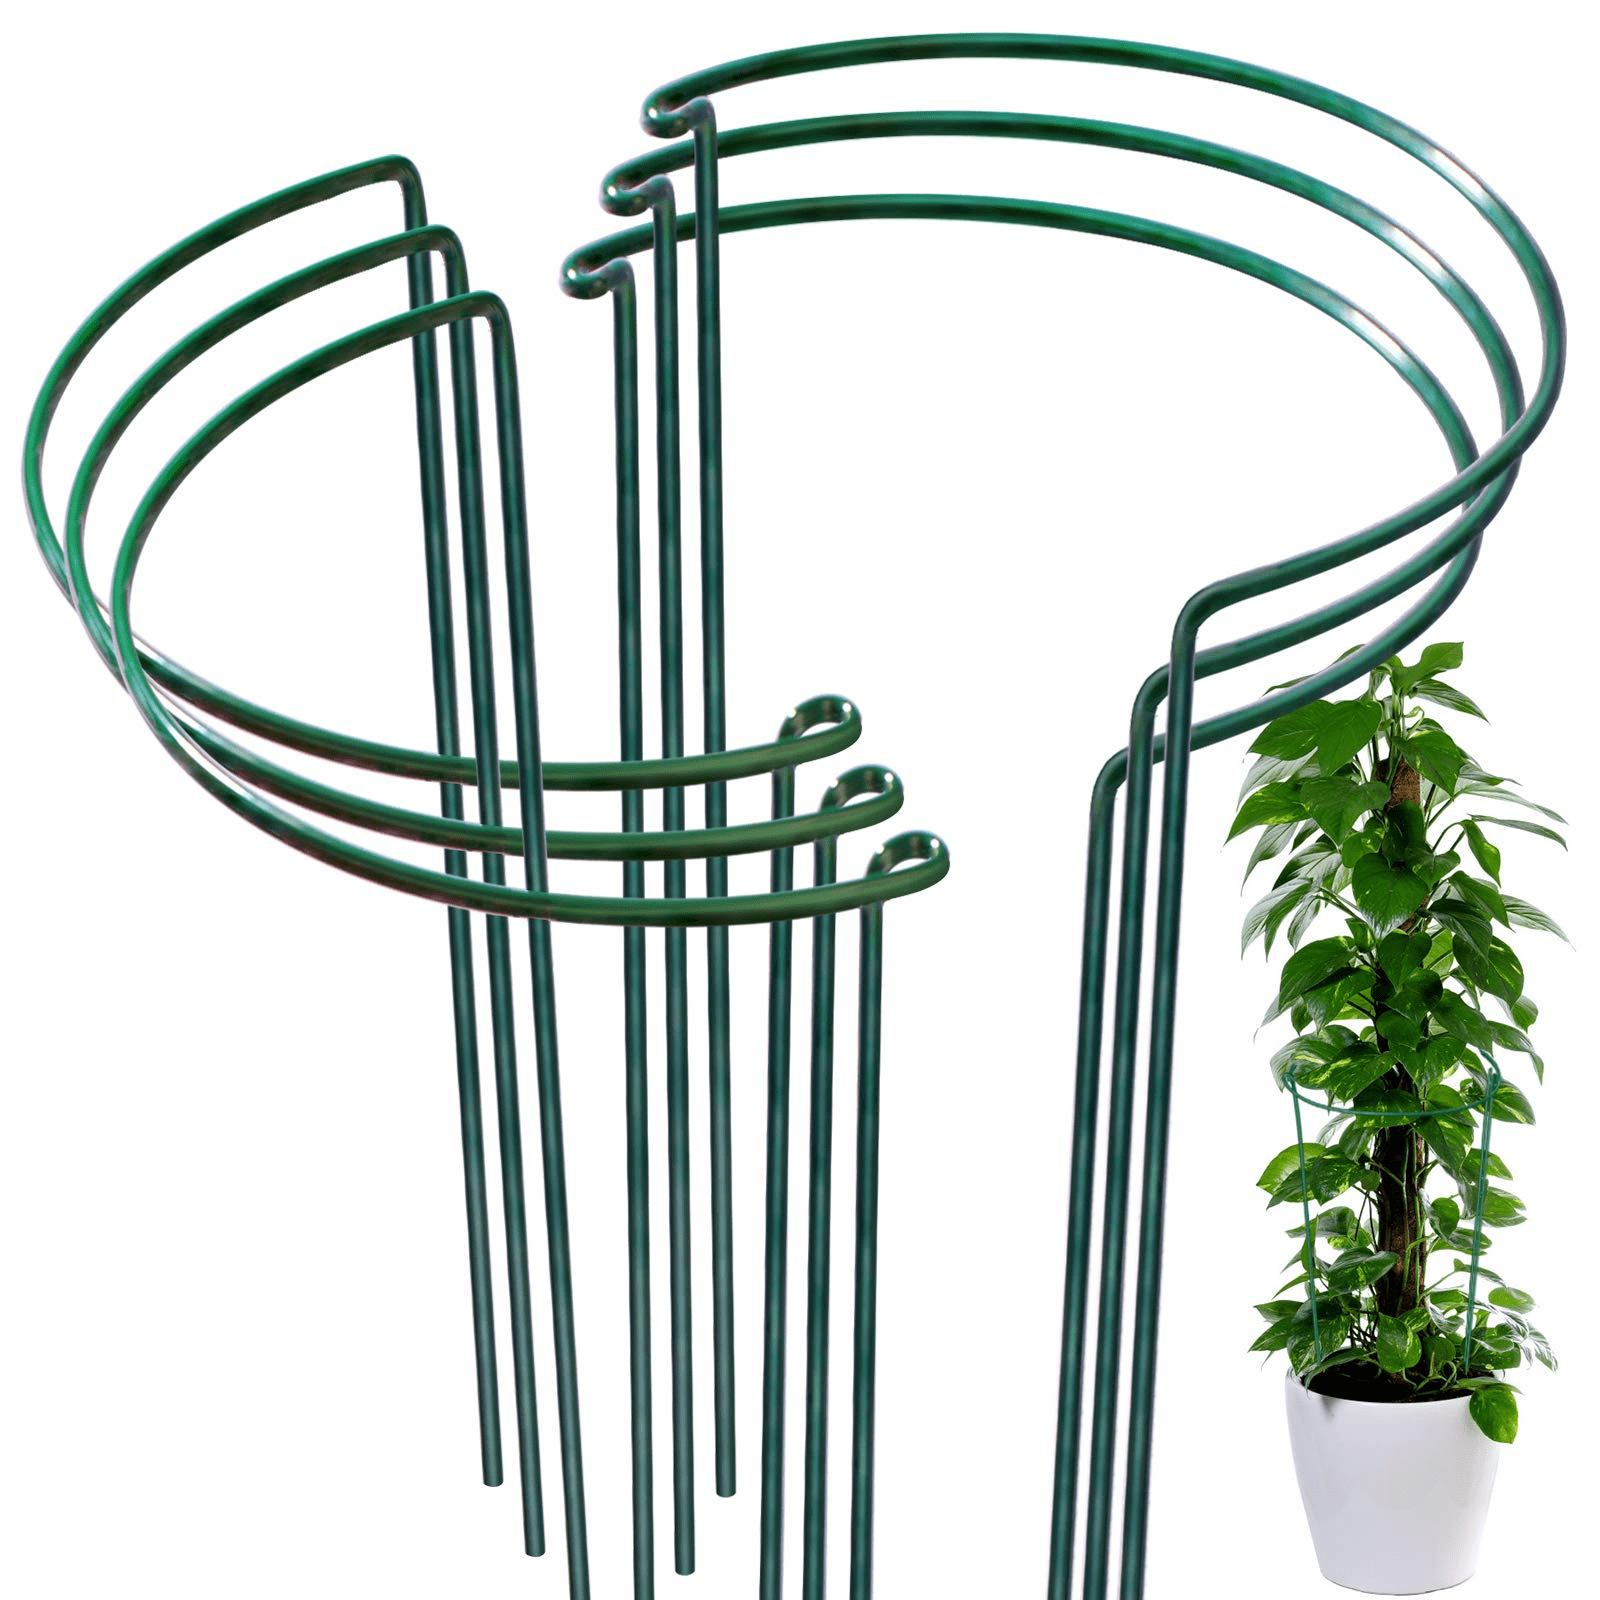 50 X 25cm Plant Support Rings for Garden Canes Flower Ties Ring Frame Pots Clip 